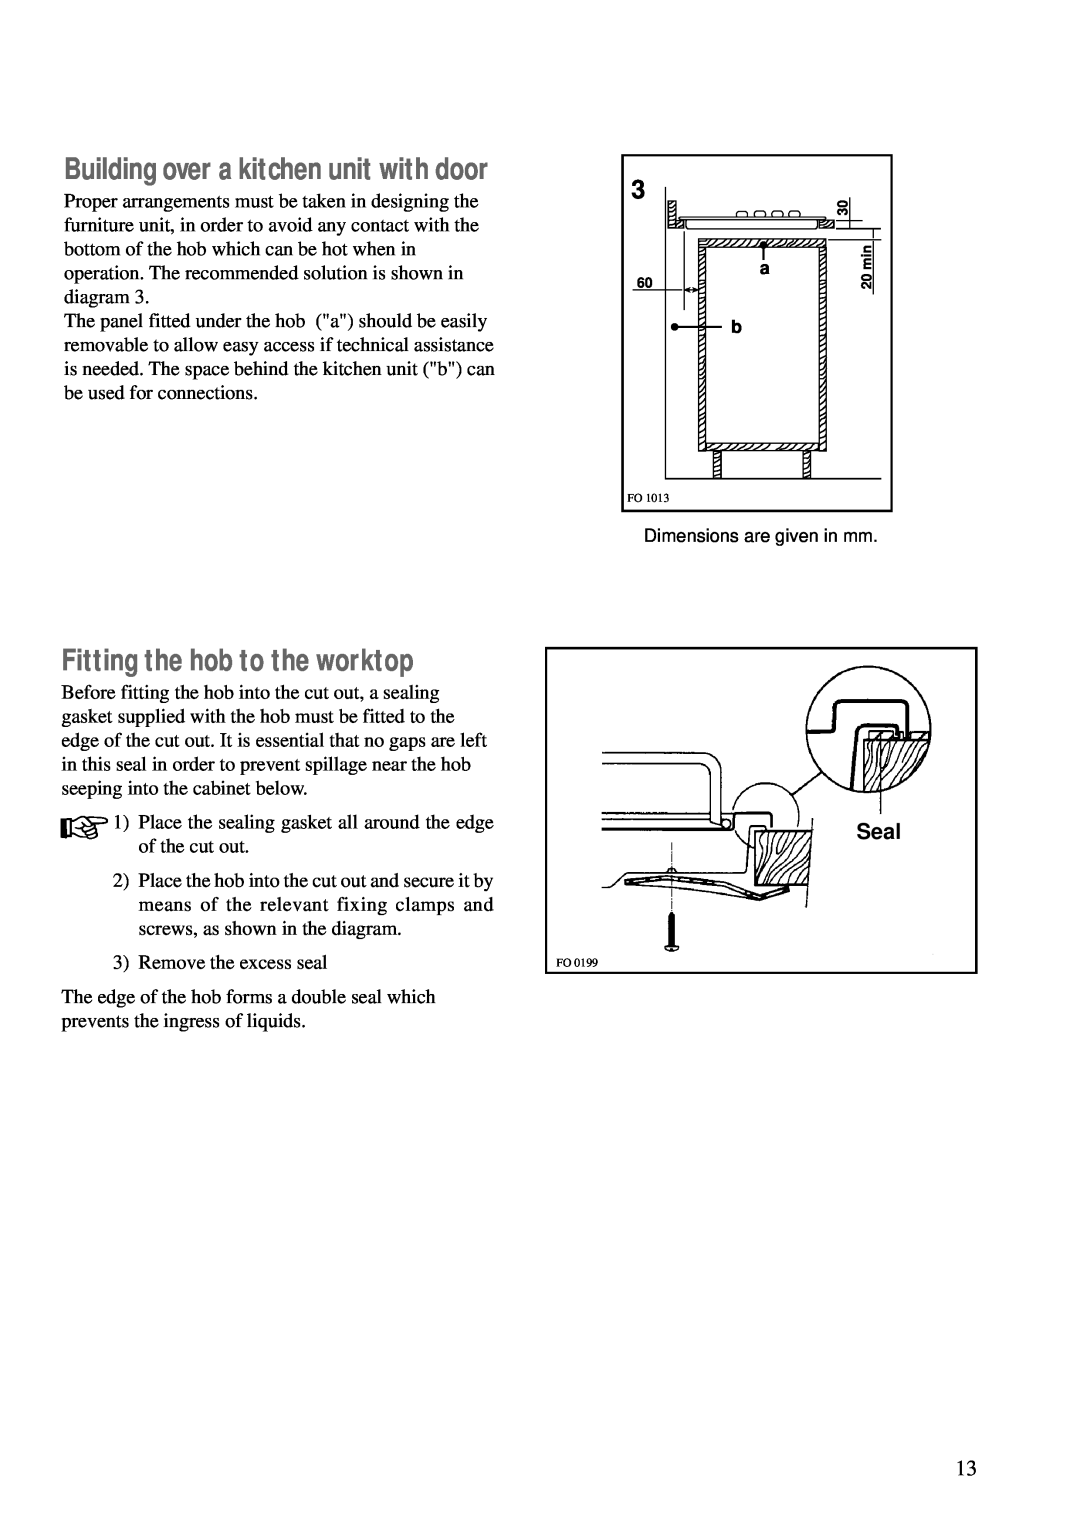 Zanussi ZBE 602 manual Fitting the hob to the worktop, Seal, Building over a kitchen unit with door 